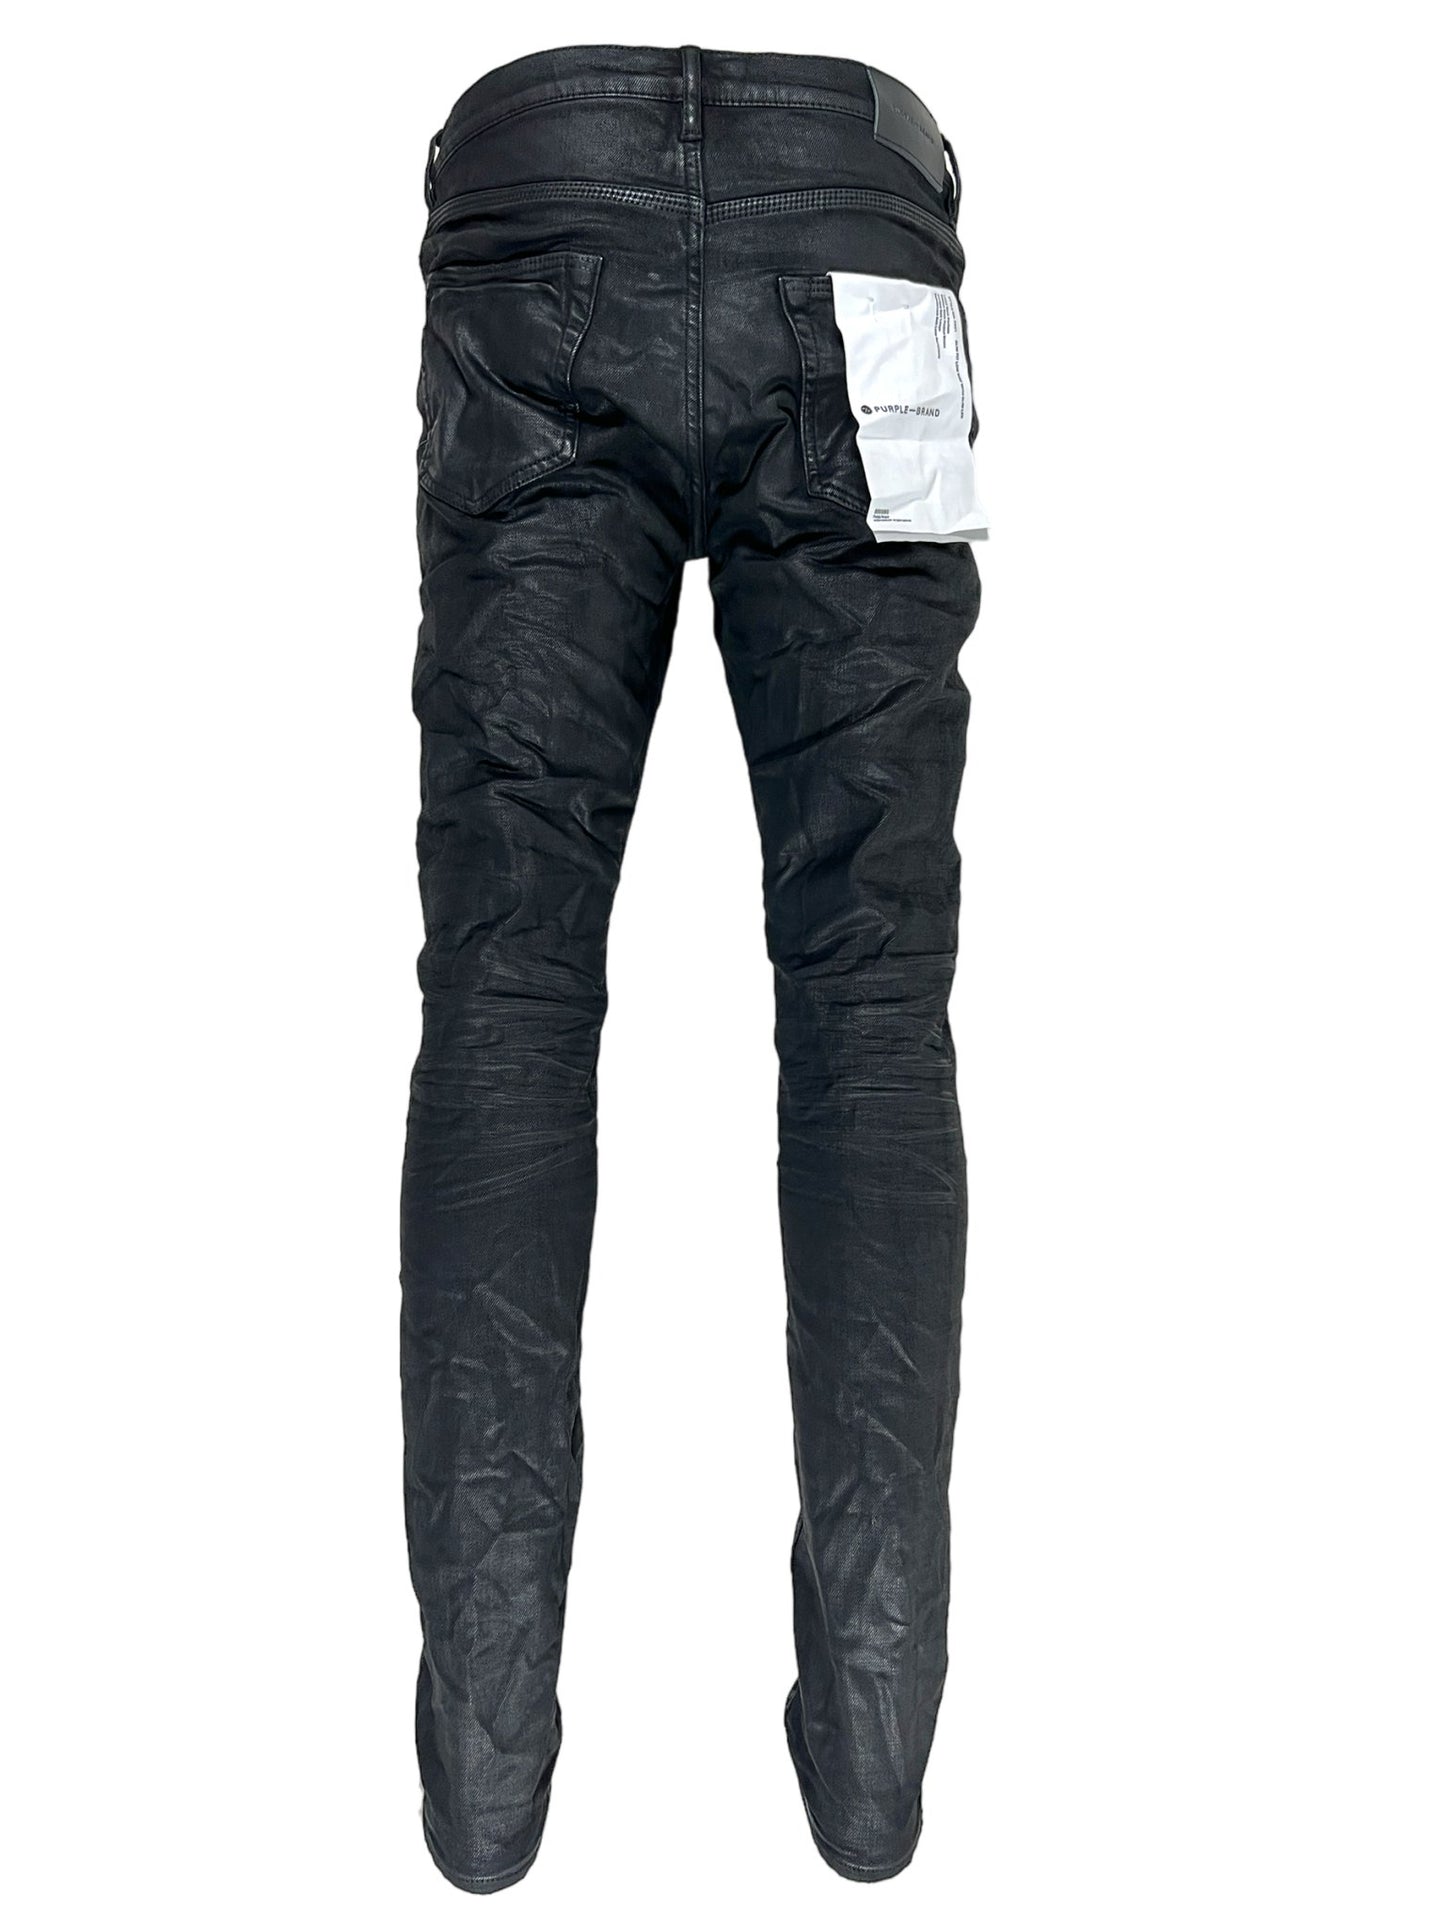 P001 Leathered skinny jeans